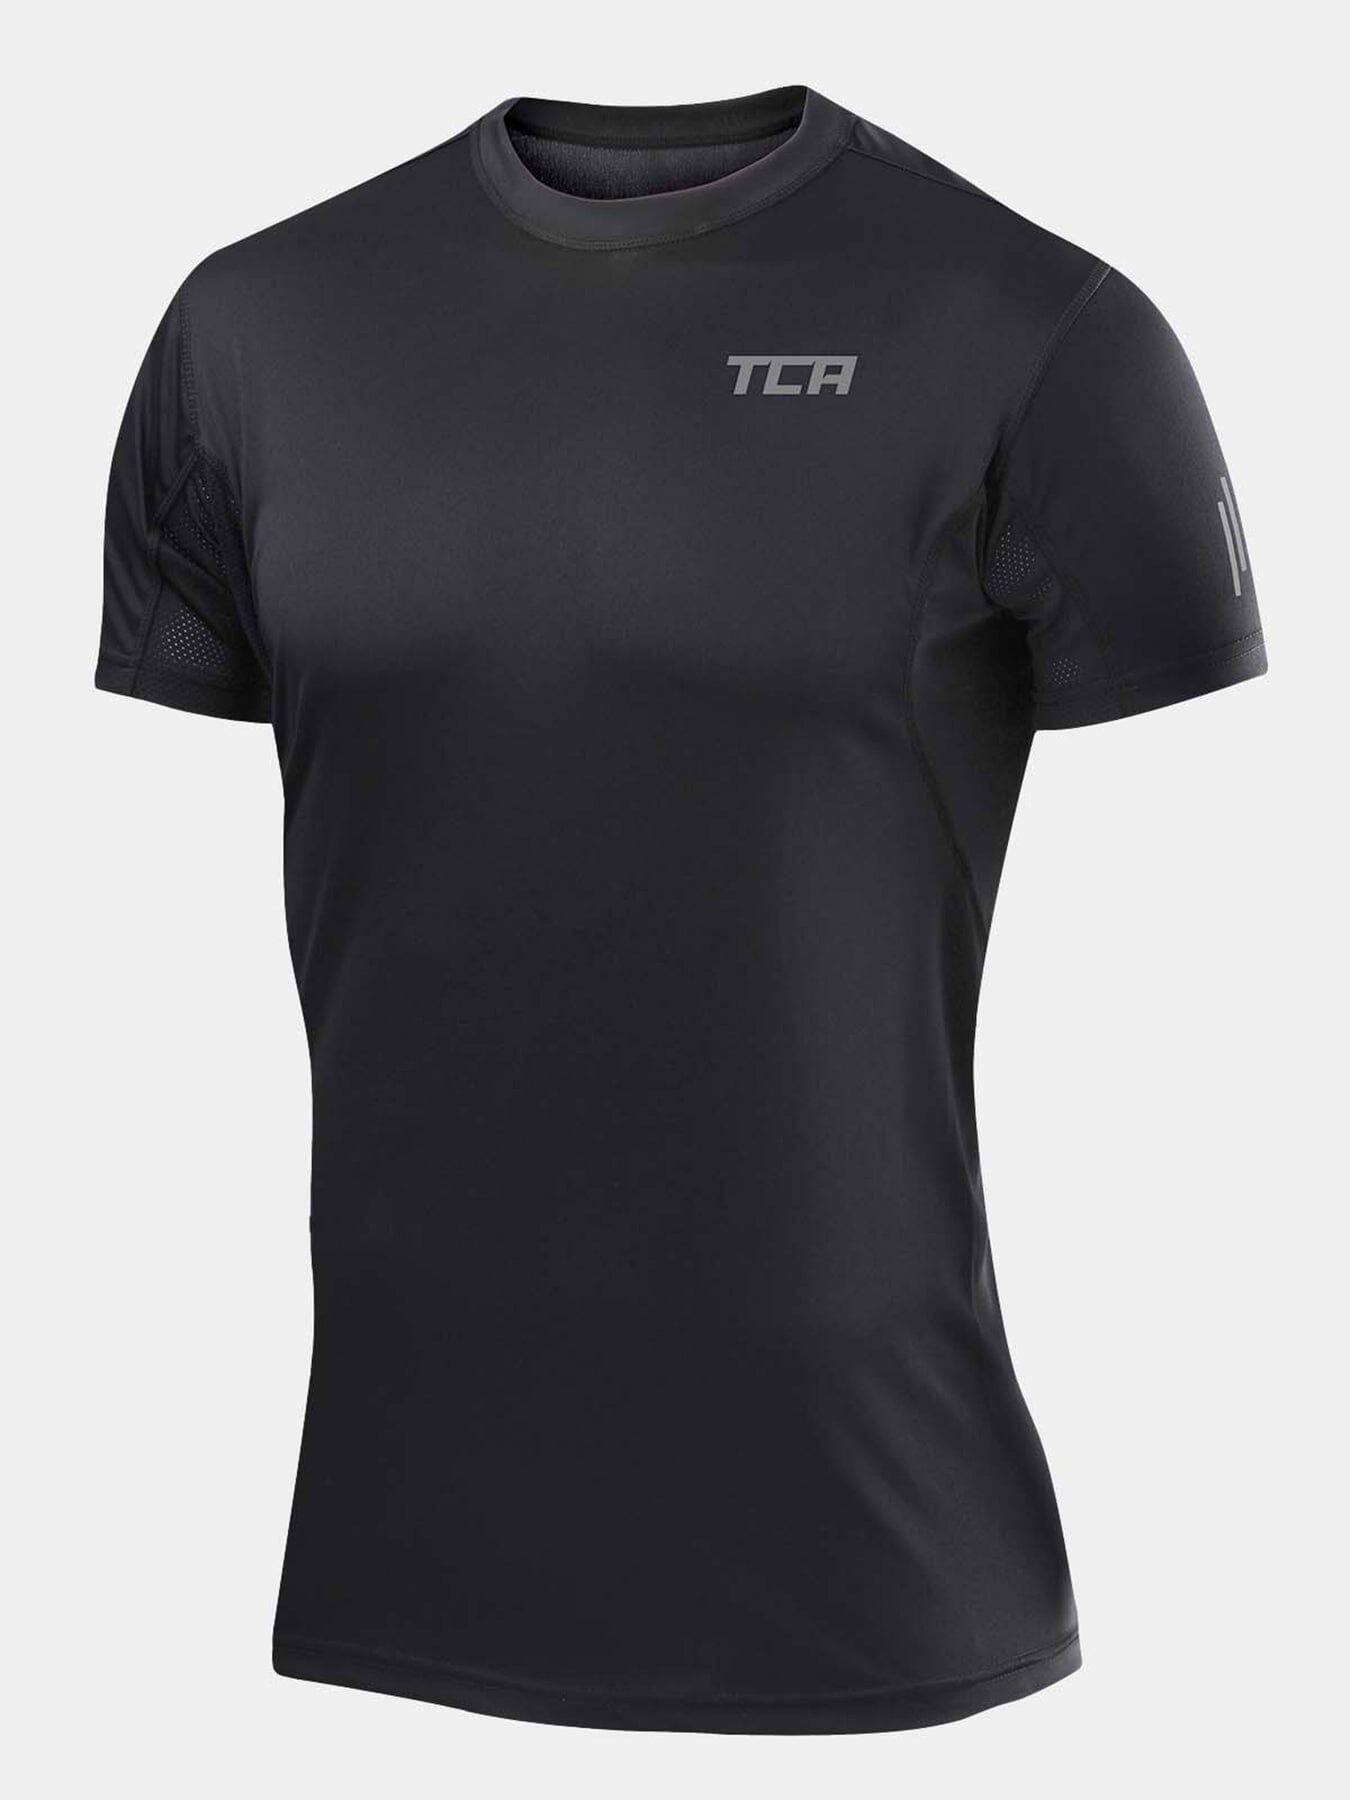 Atomic Short Sleeve T-Shirt With UPF 50+ Protection & Side Mesh Panels For Men